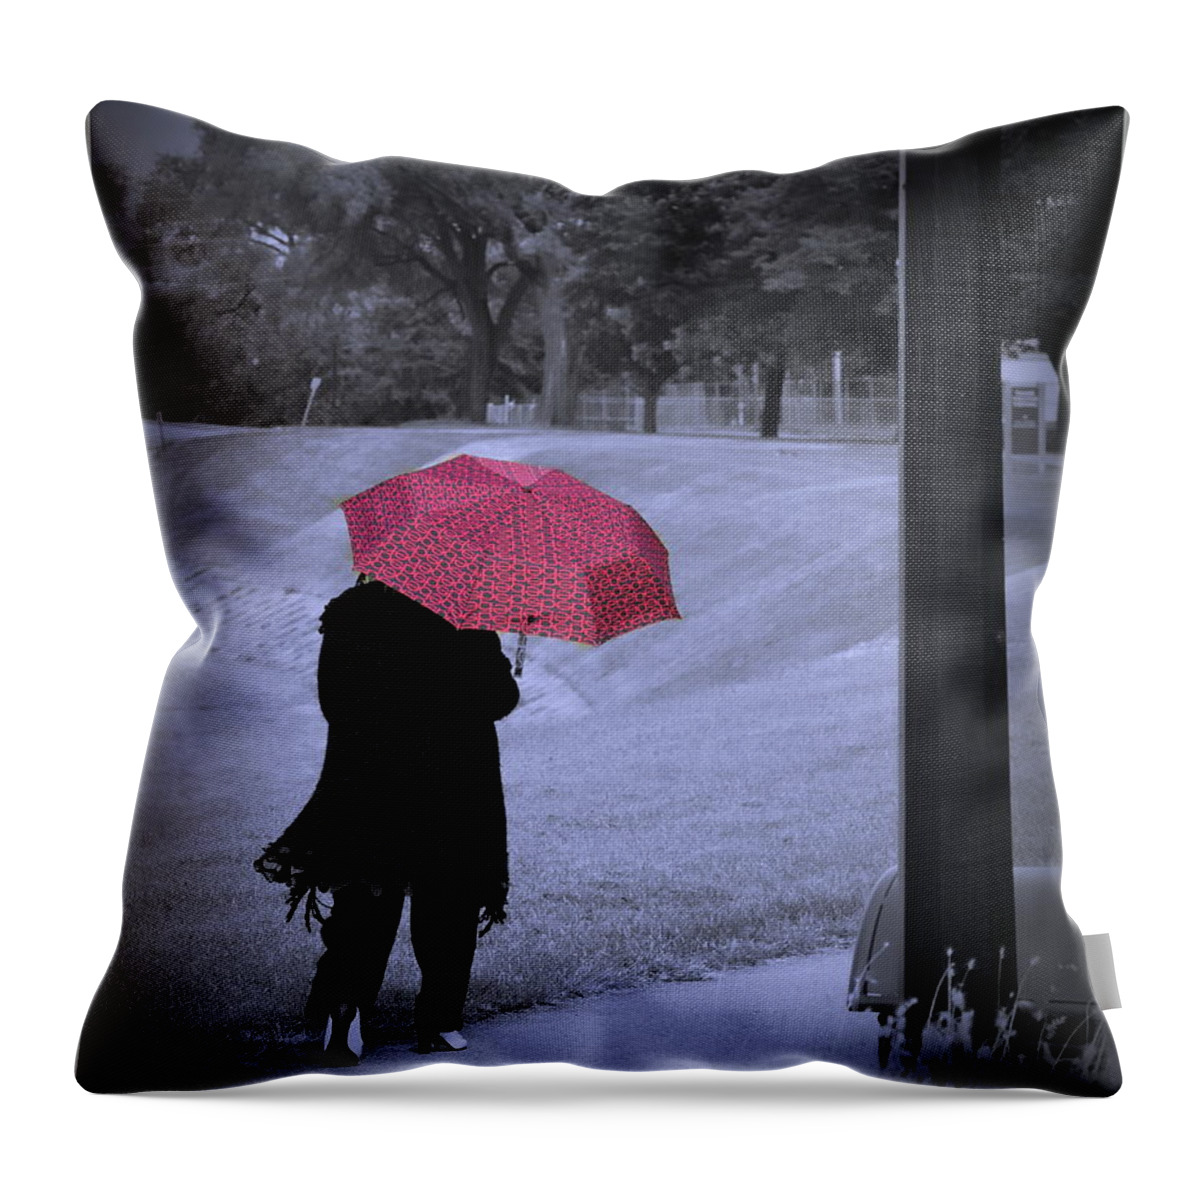  Throw Pillow featuring the photograph Red Umbrella by Jack Wilson